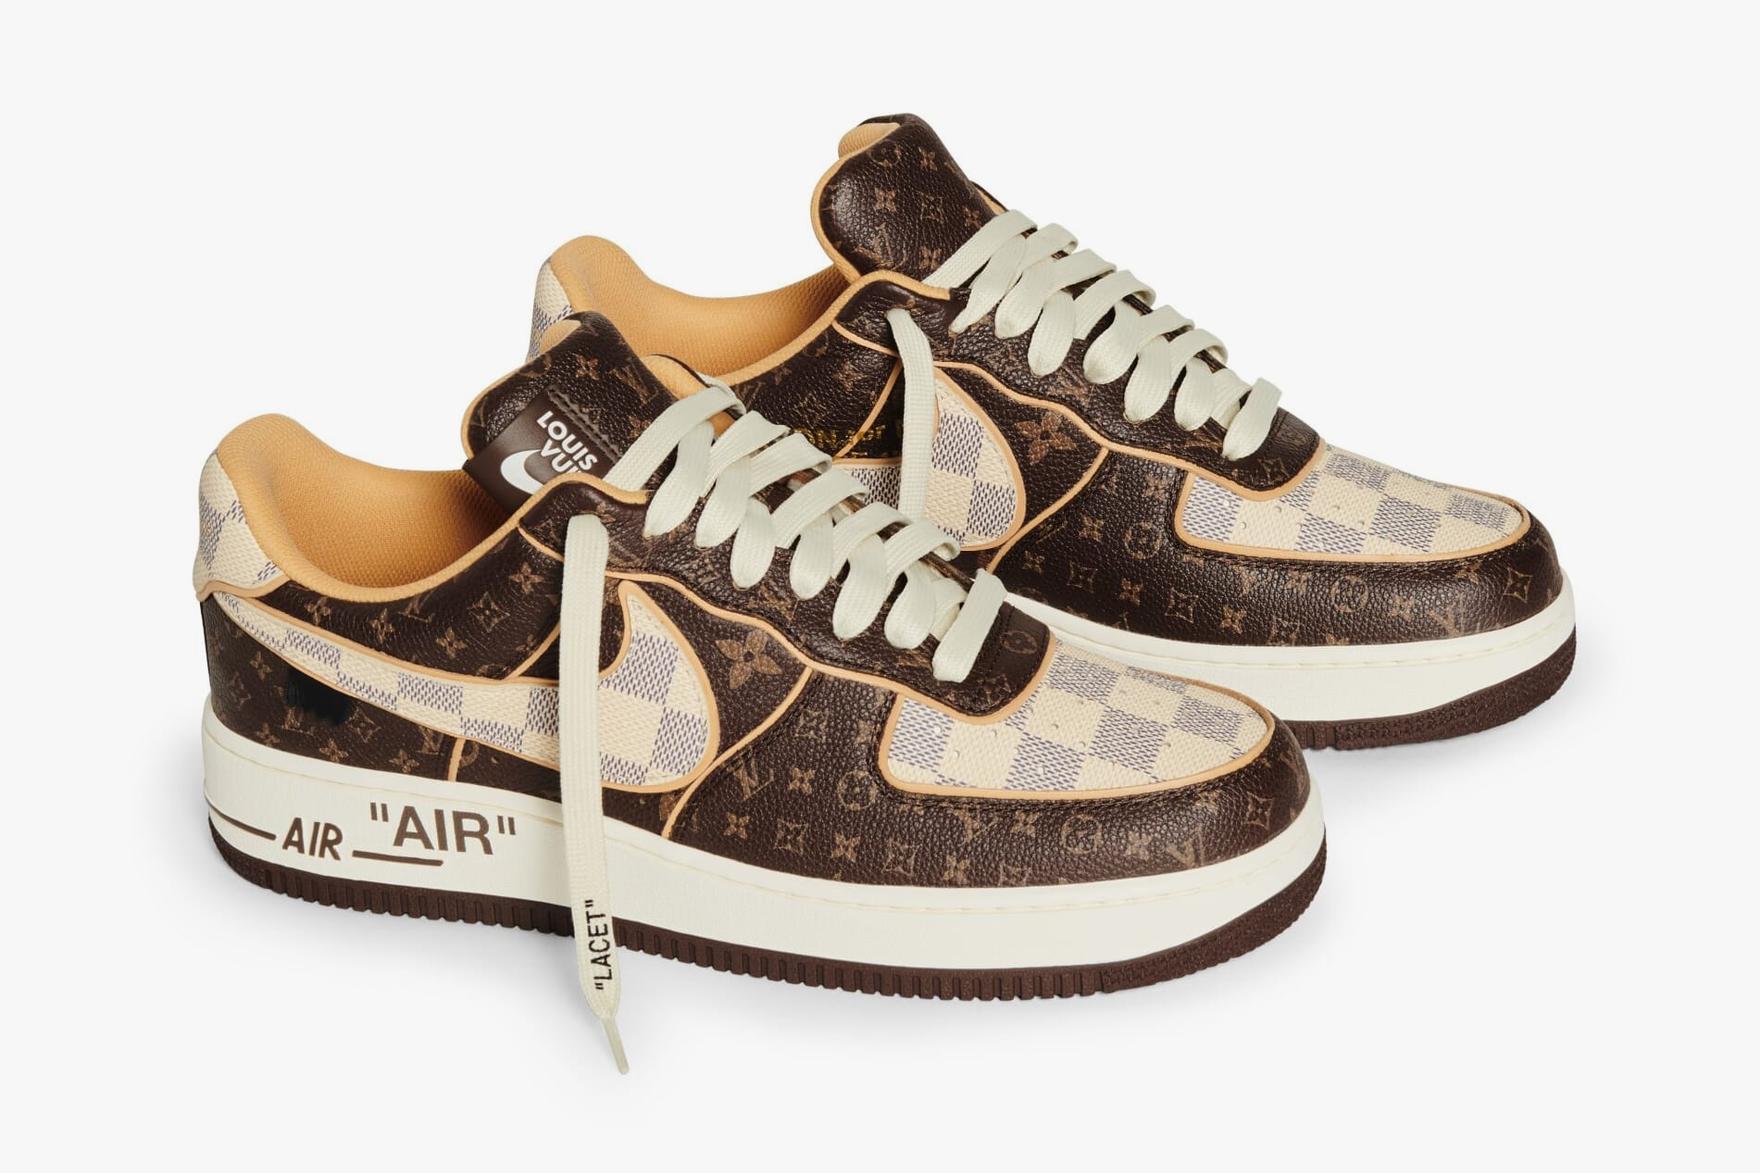 Sotheby's Louis Vuitton x Nike Air Force 1 Auction Interview